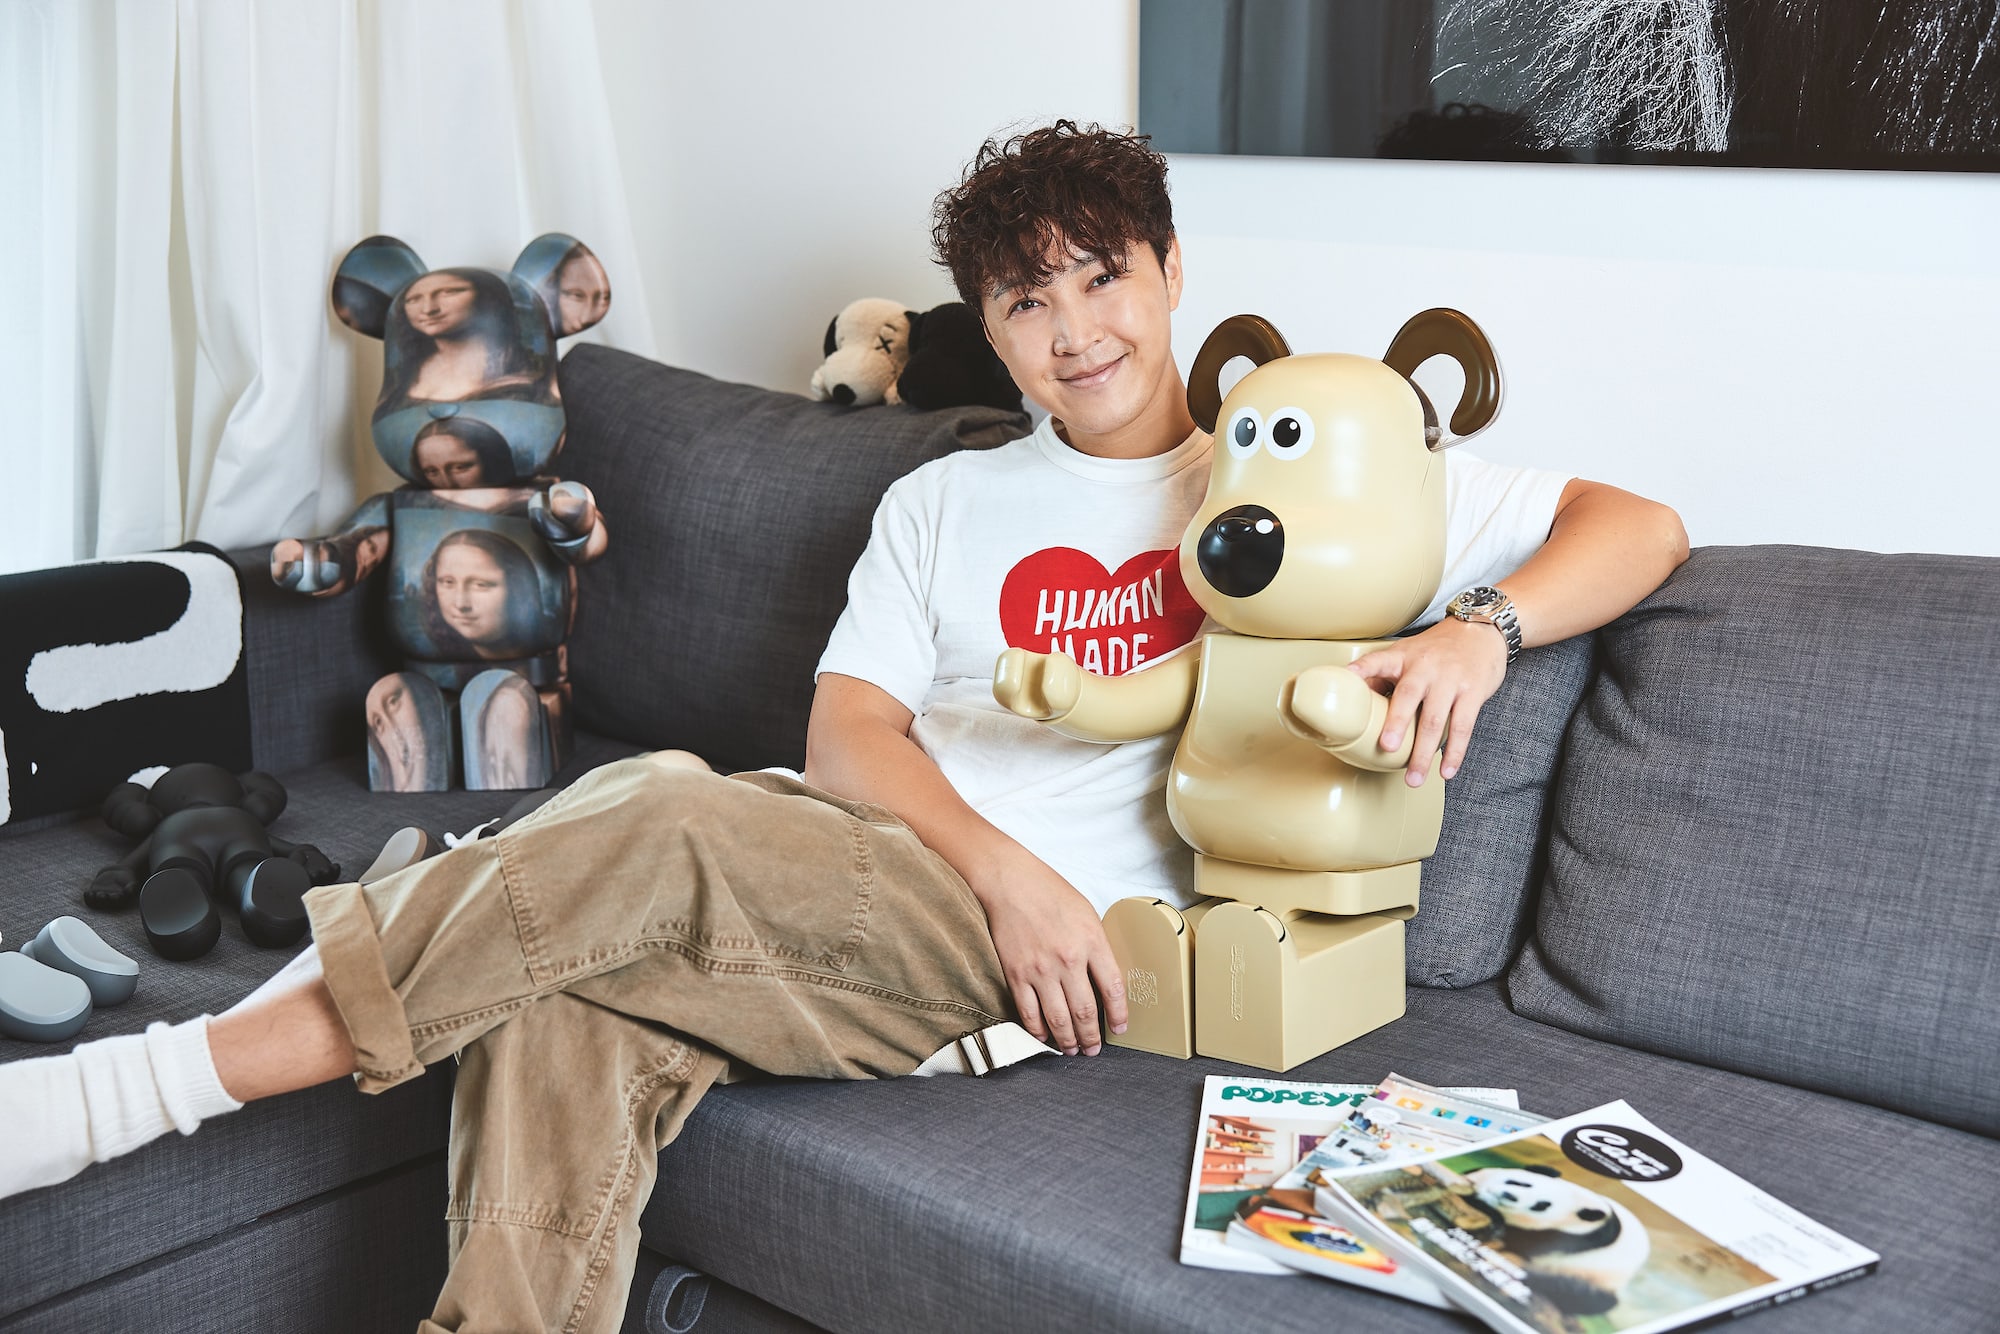 Jeffrey Xu’s S$800K Condo Is Filled With Designer Toys, Cool Artwork & ‘Mementos’ From Fights With Girlfriend Felicia Chin